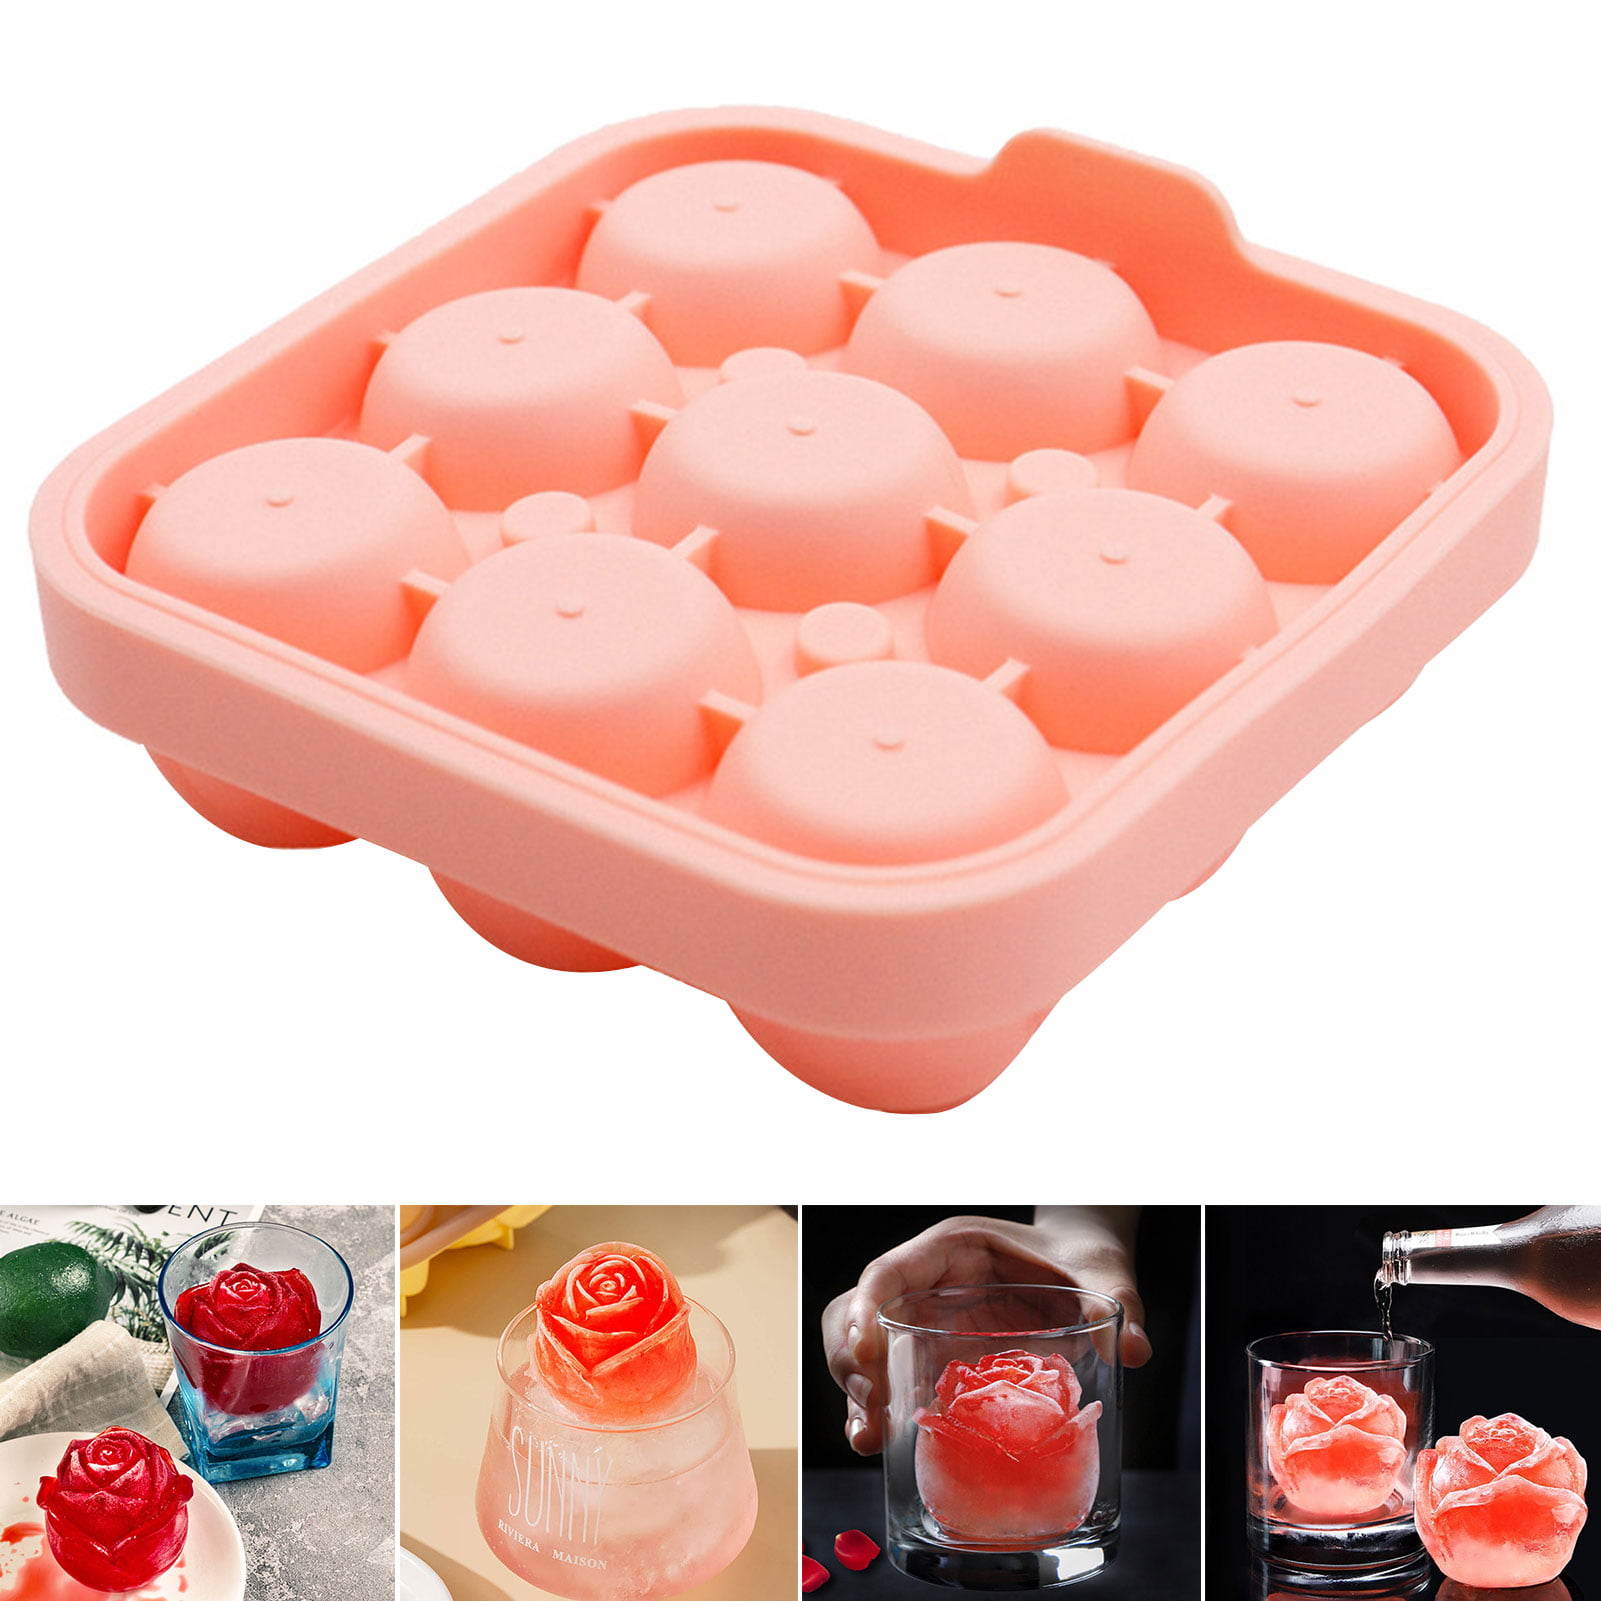 Sidosir 3Pcs Extra Large Ice Mold, 9-inch Nonstick Silicone Mold for 4.5  lbs Ice Cubes for Cold Plunge tub or Coolers, Big Silicone Ice Cube Tray